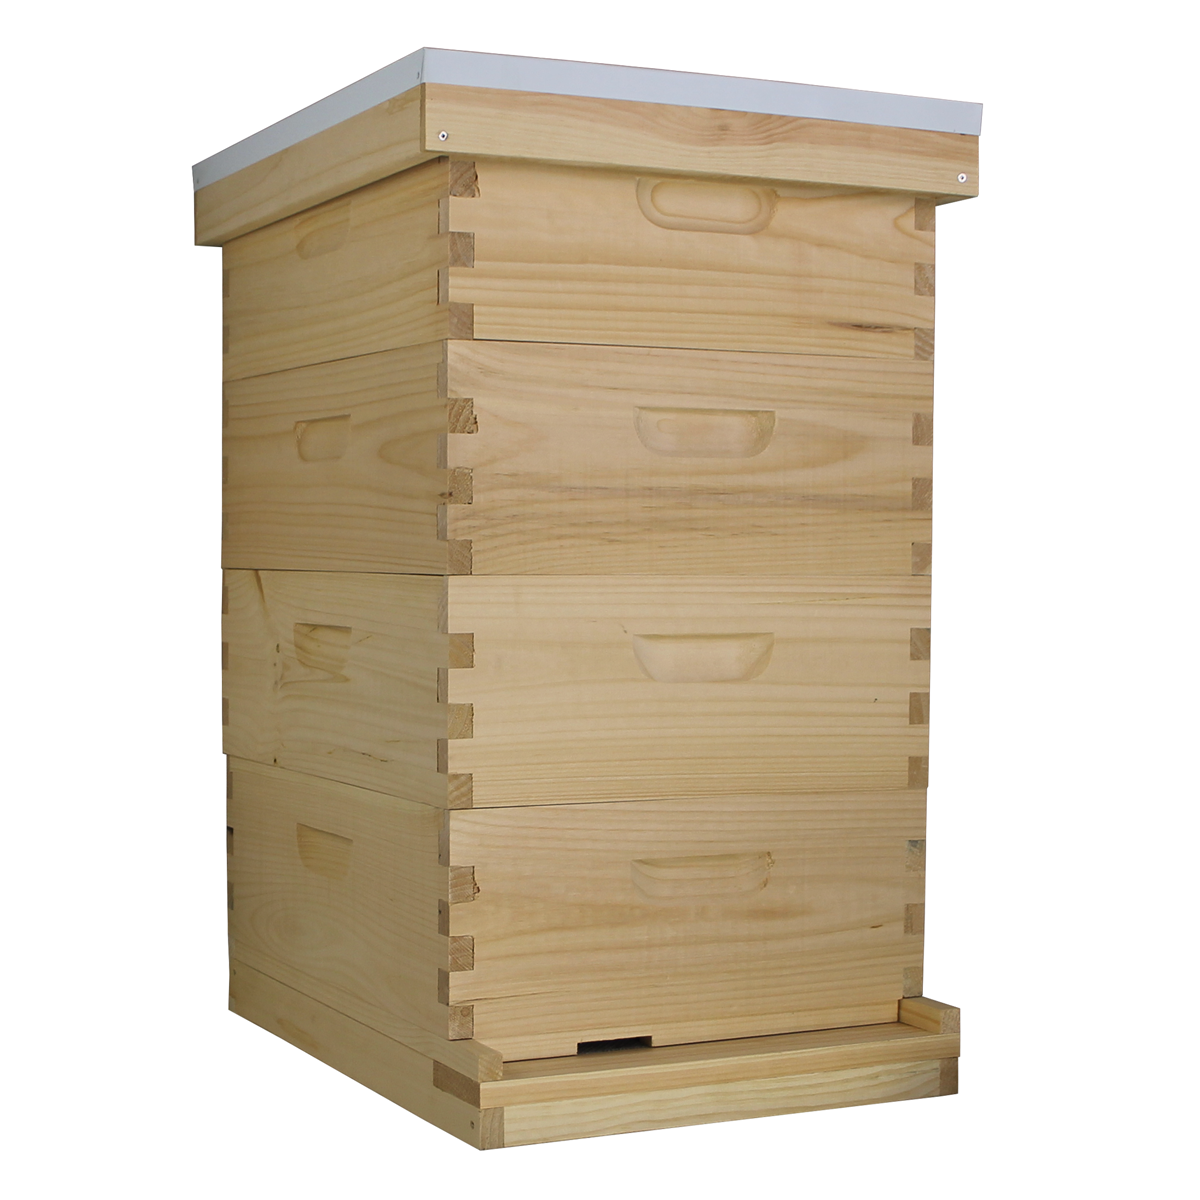 Busy Bees 'N' More Amish Made 10 Frame Beehive With 4 Medium Bee Boxes